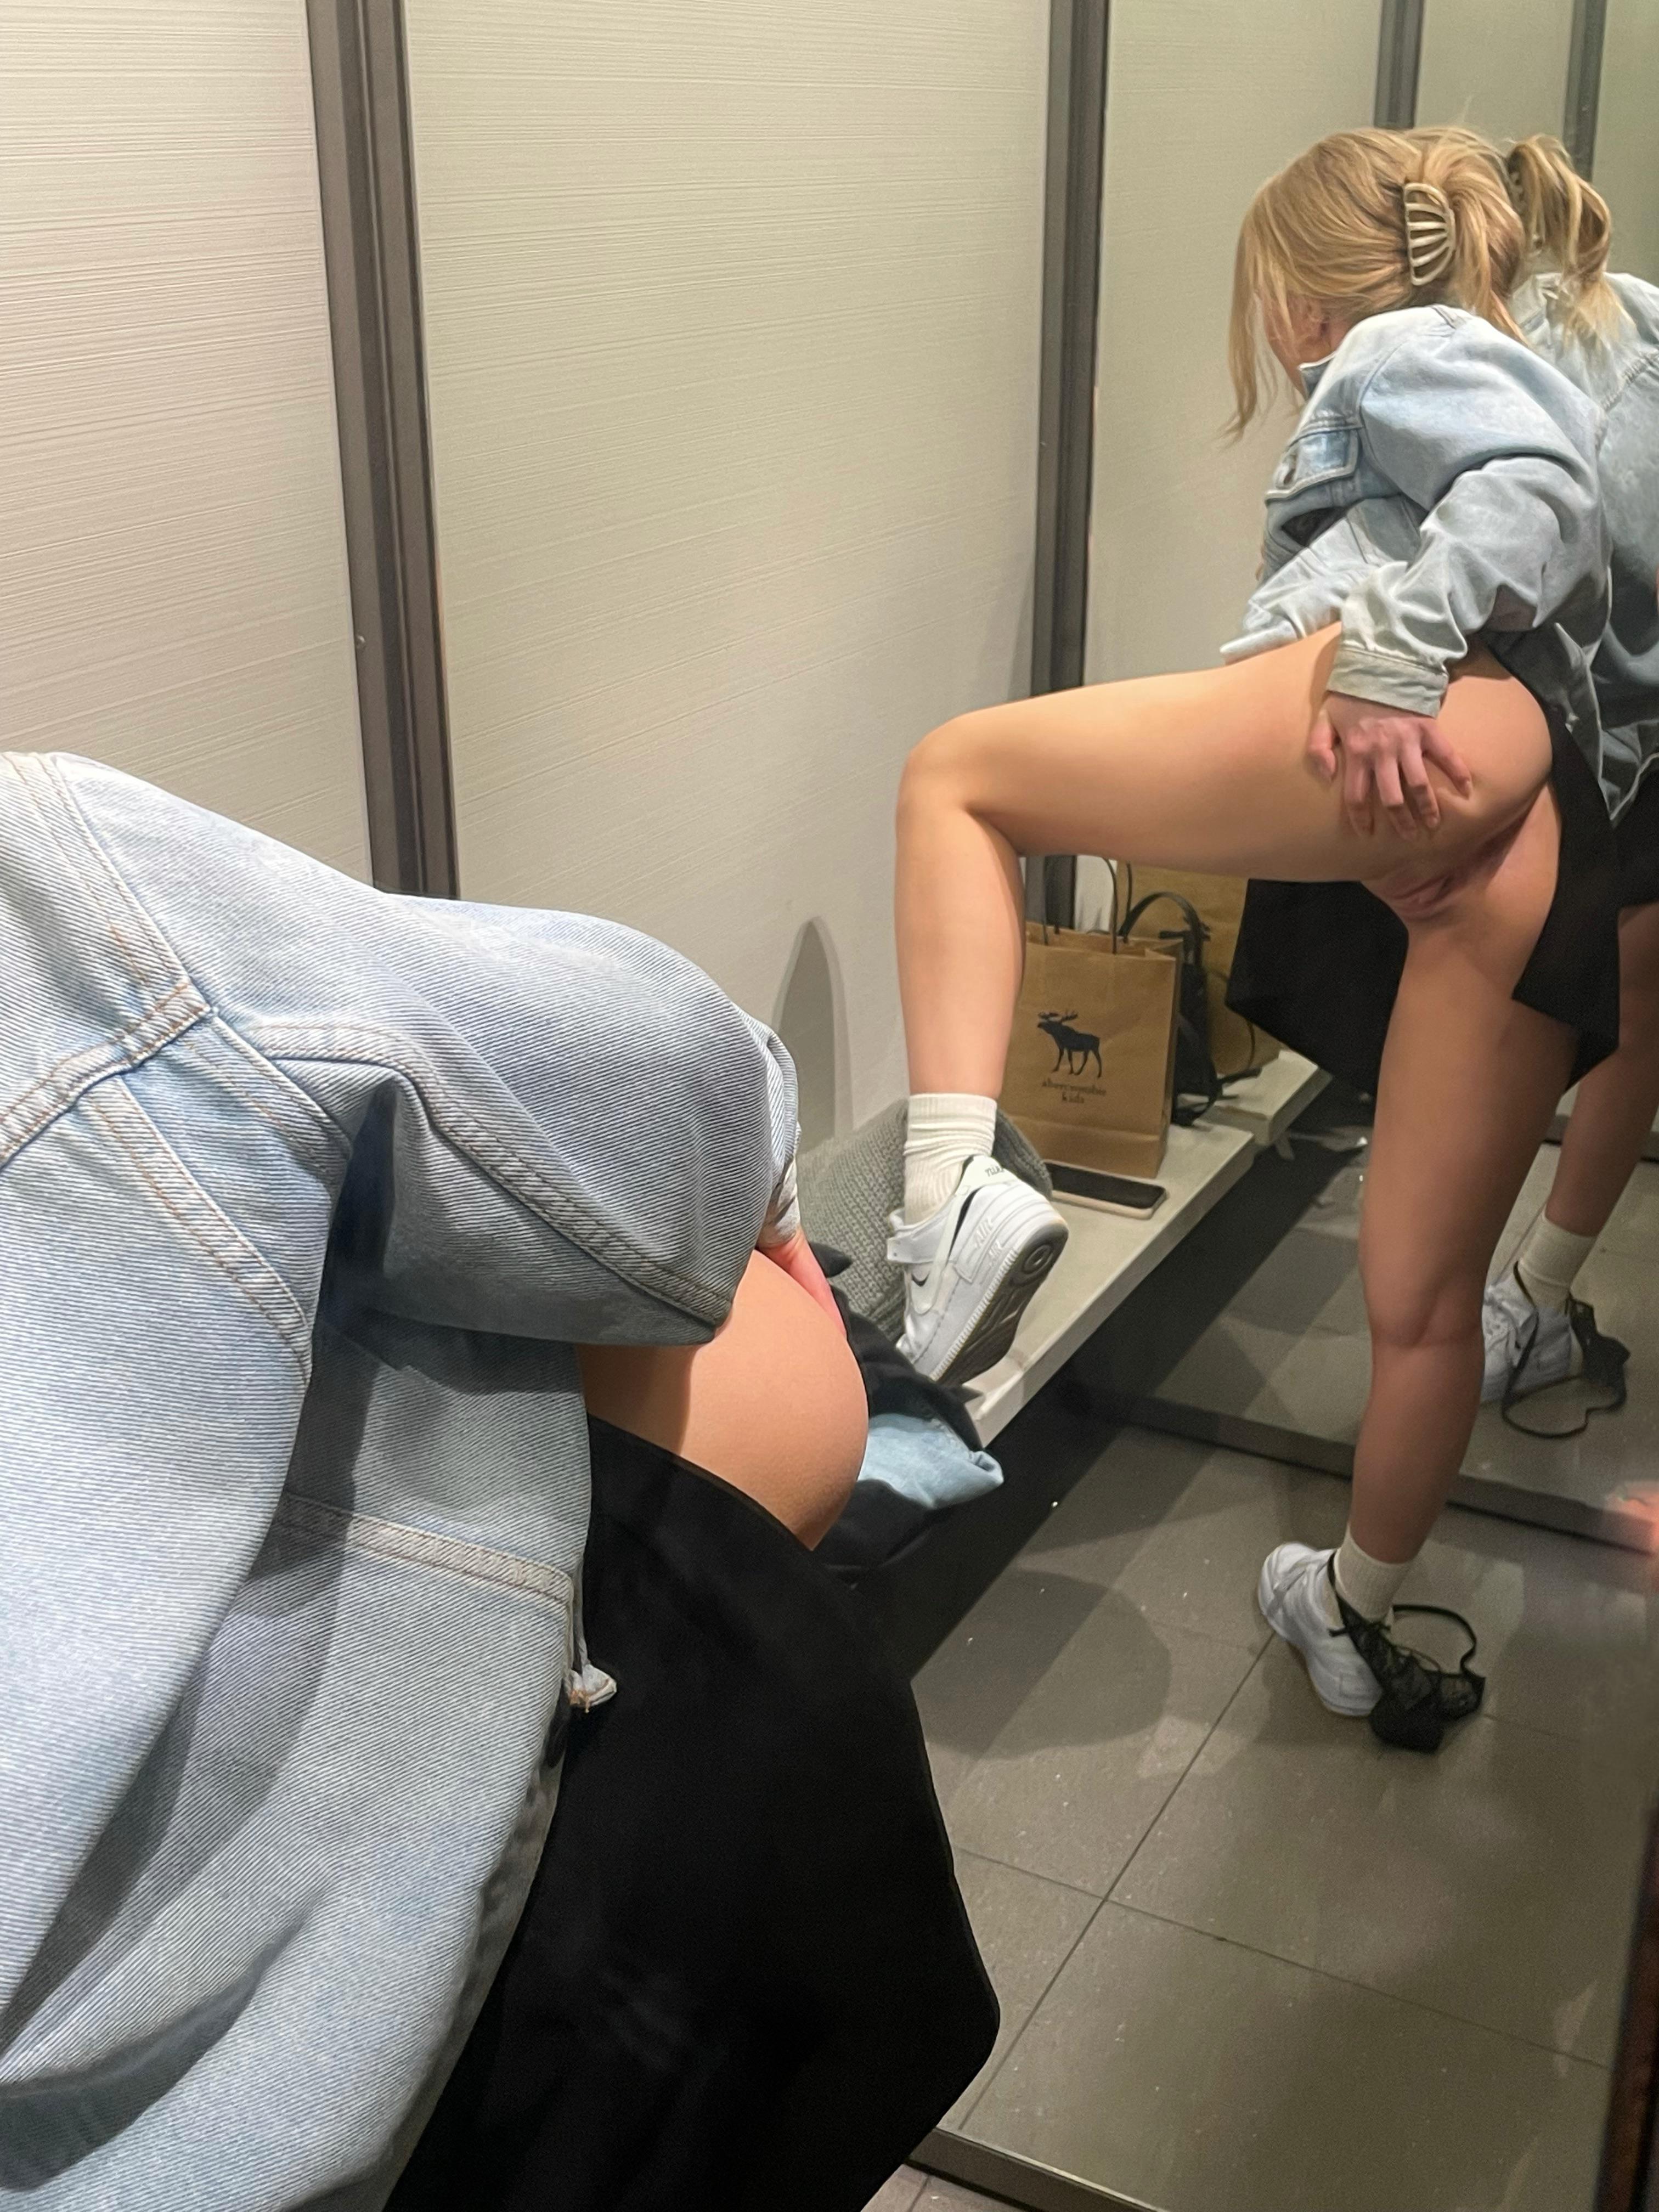 Just fuck me in the fitting room daddy pic